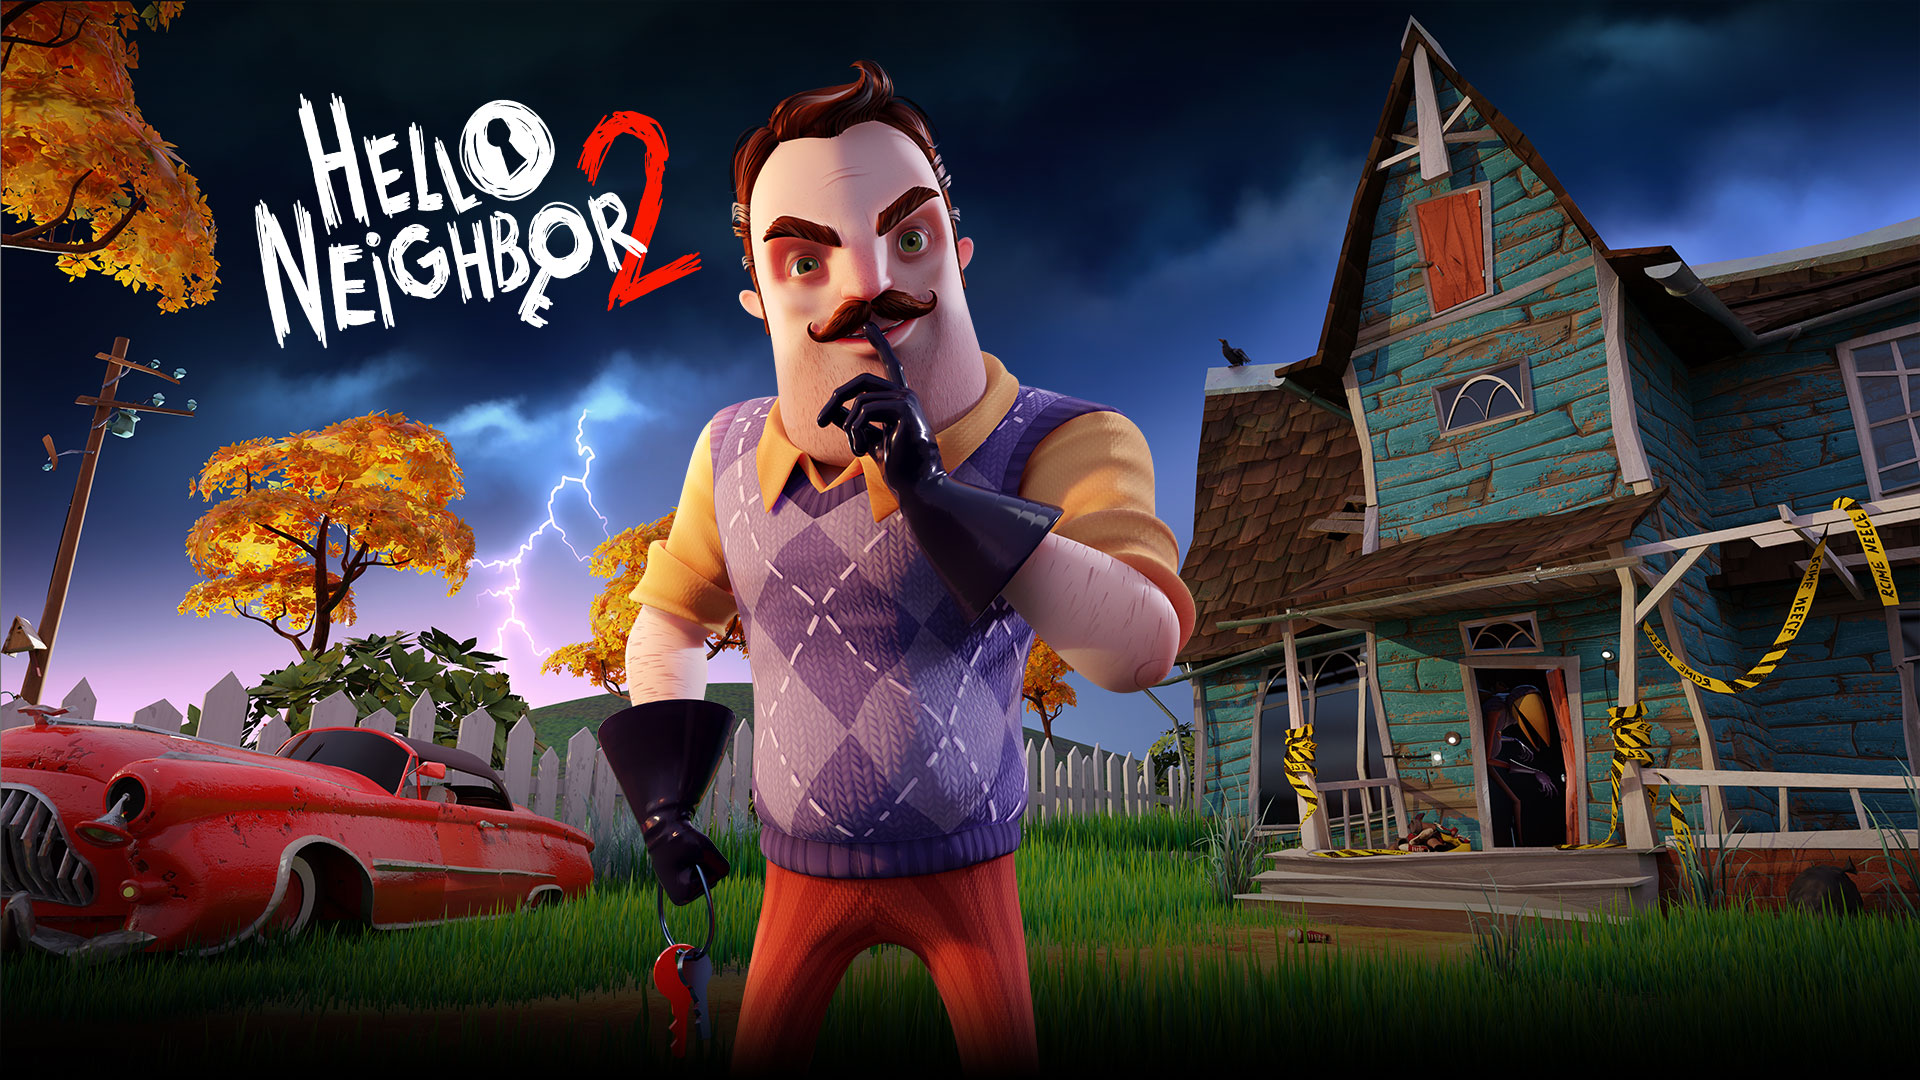 Download hello neighbor 2 alpha 1.5 for free - awose